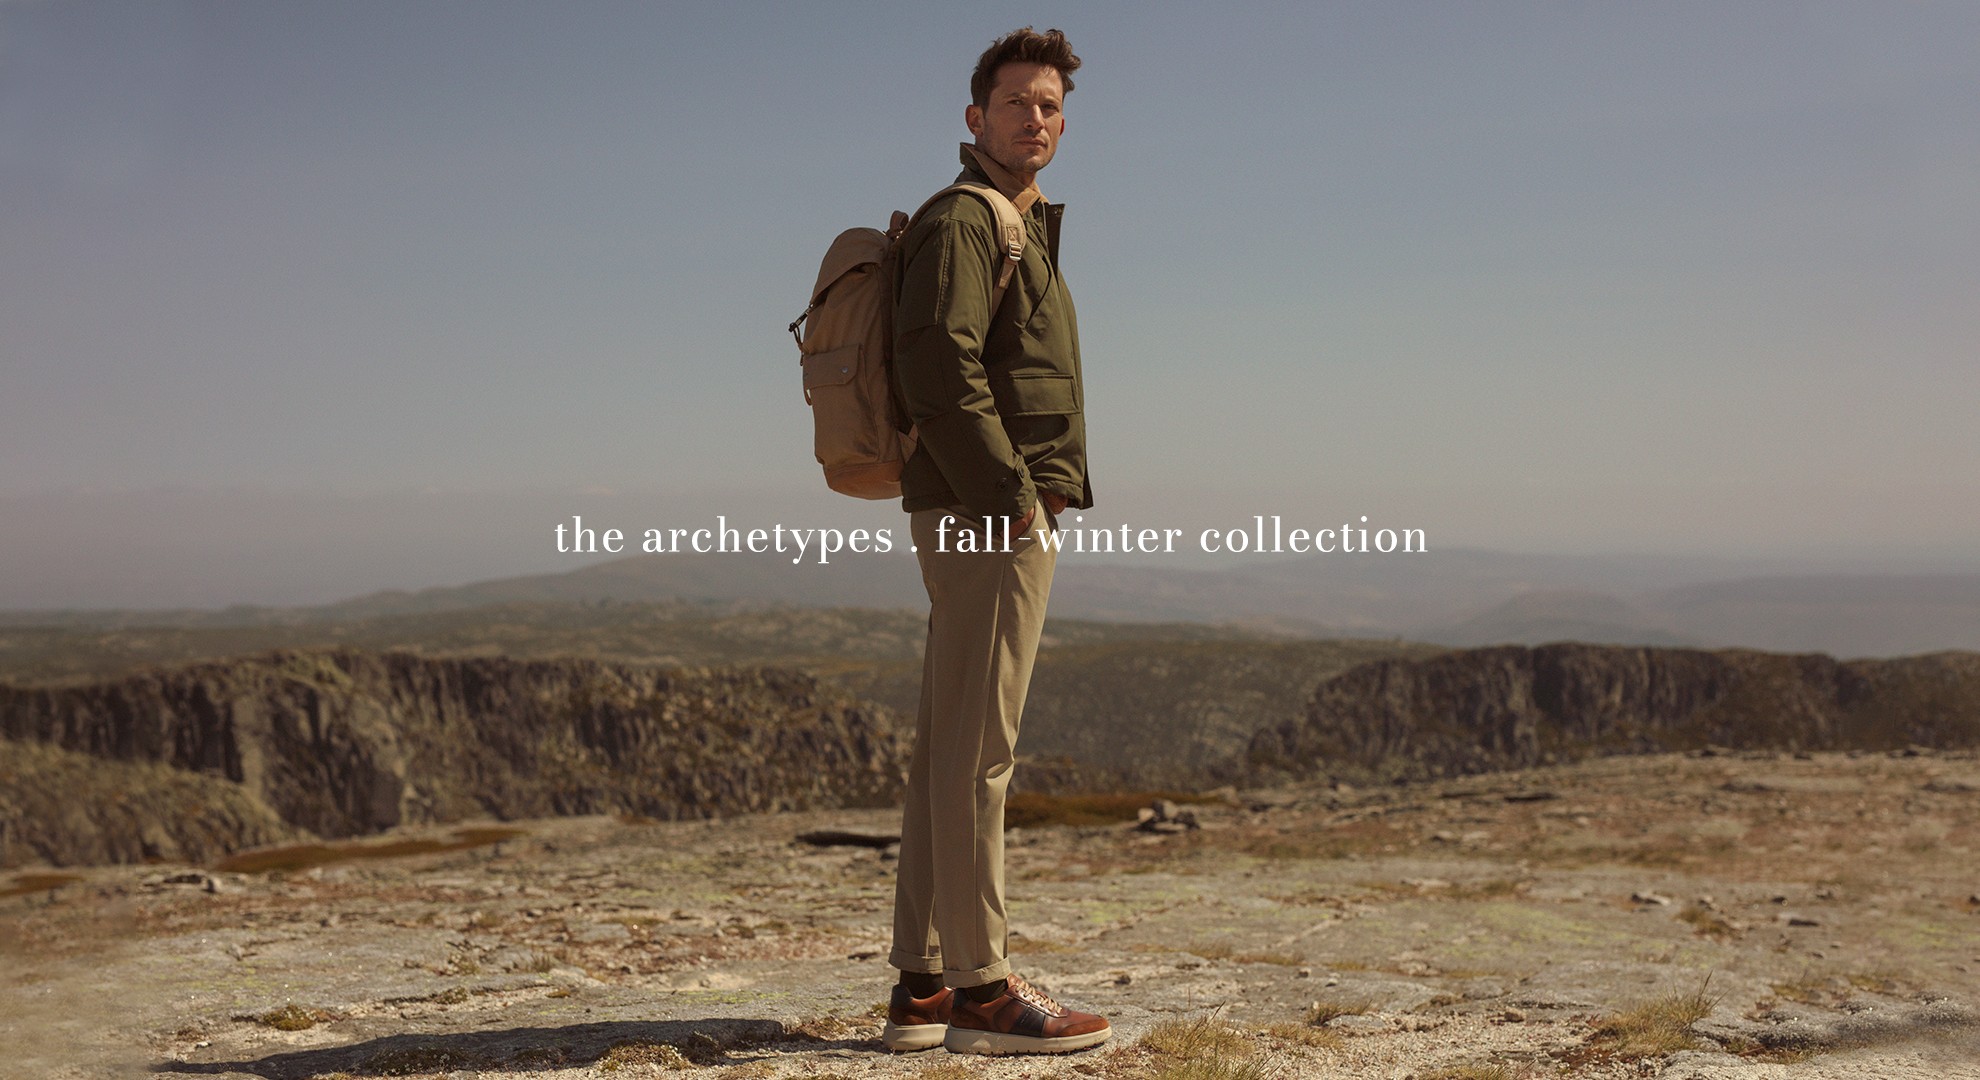 The Archetypes. New Ambitious Footwear collection. Official Store. Express Delivery worldwide.